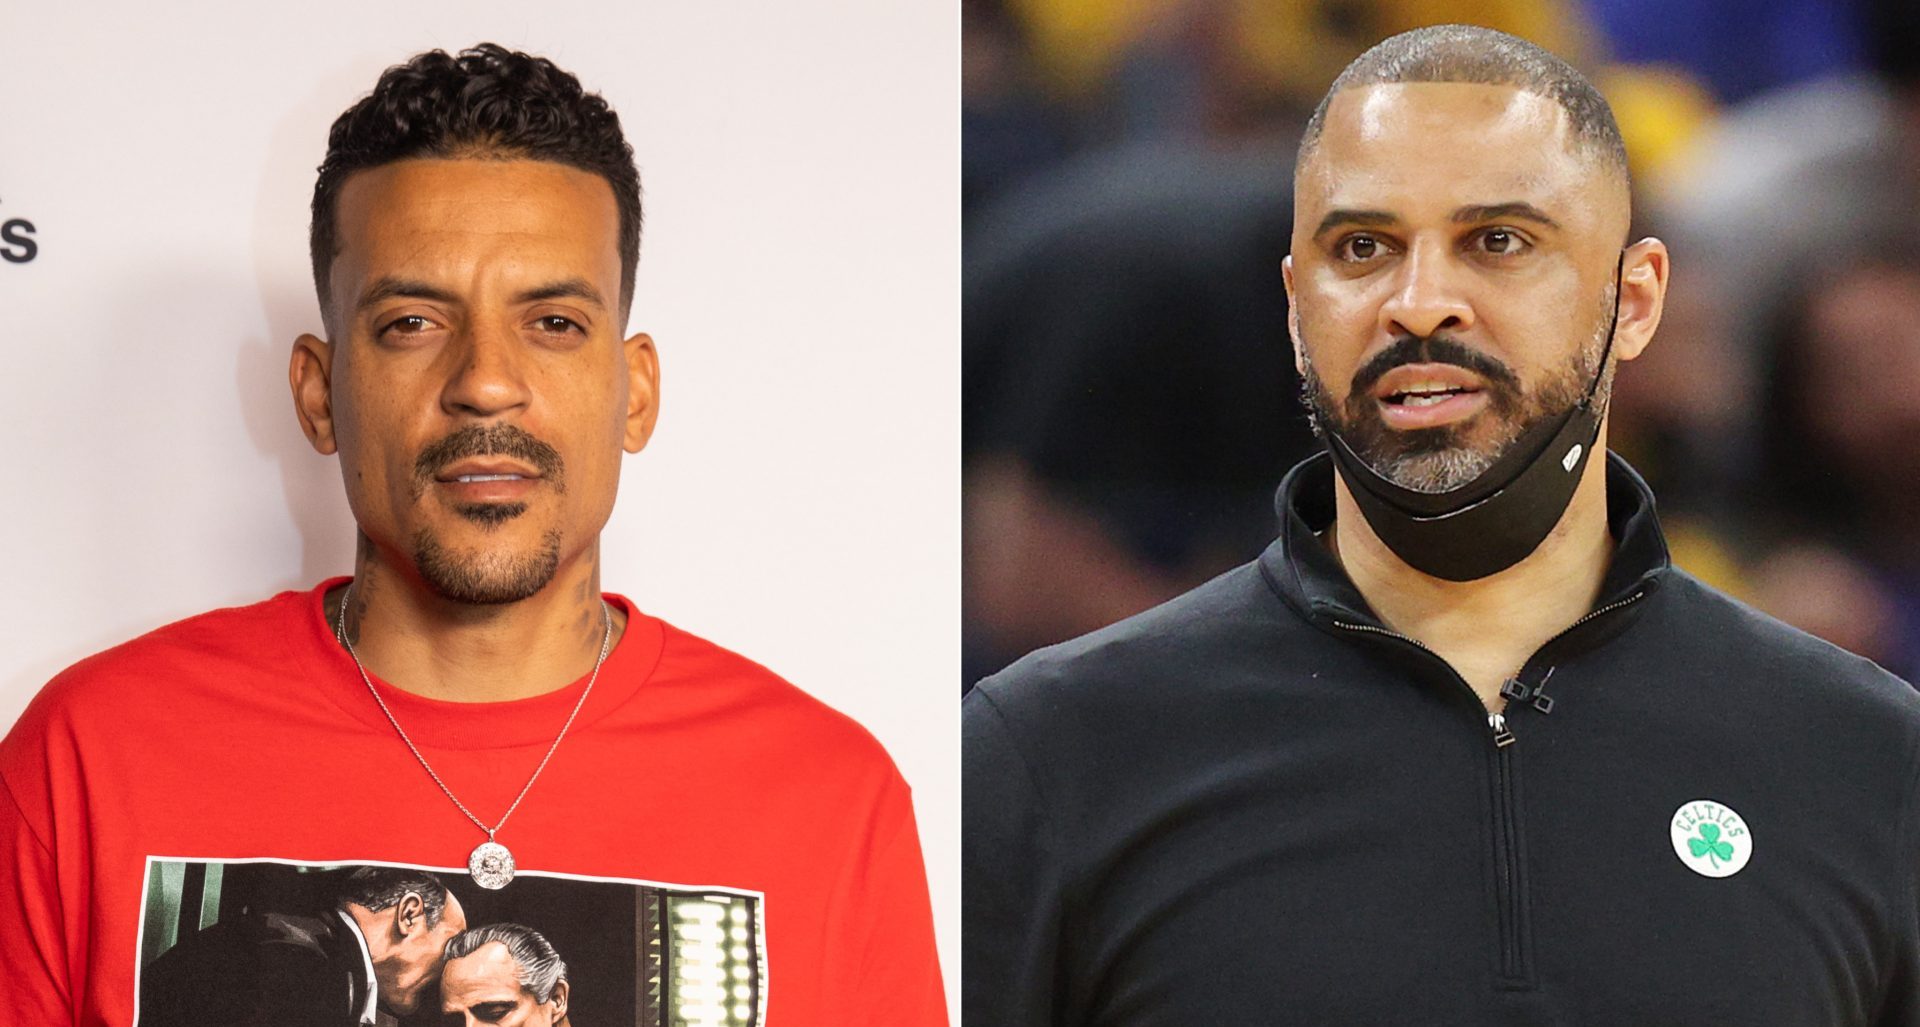 Matt Barnes posted a video sharing his thoughts on the suspension of Ime Udoka and said the Celtics made a terrible mistake.